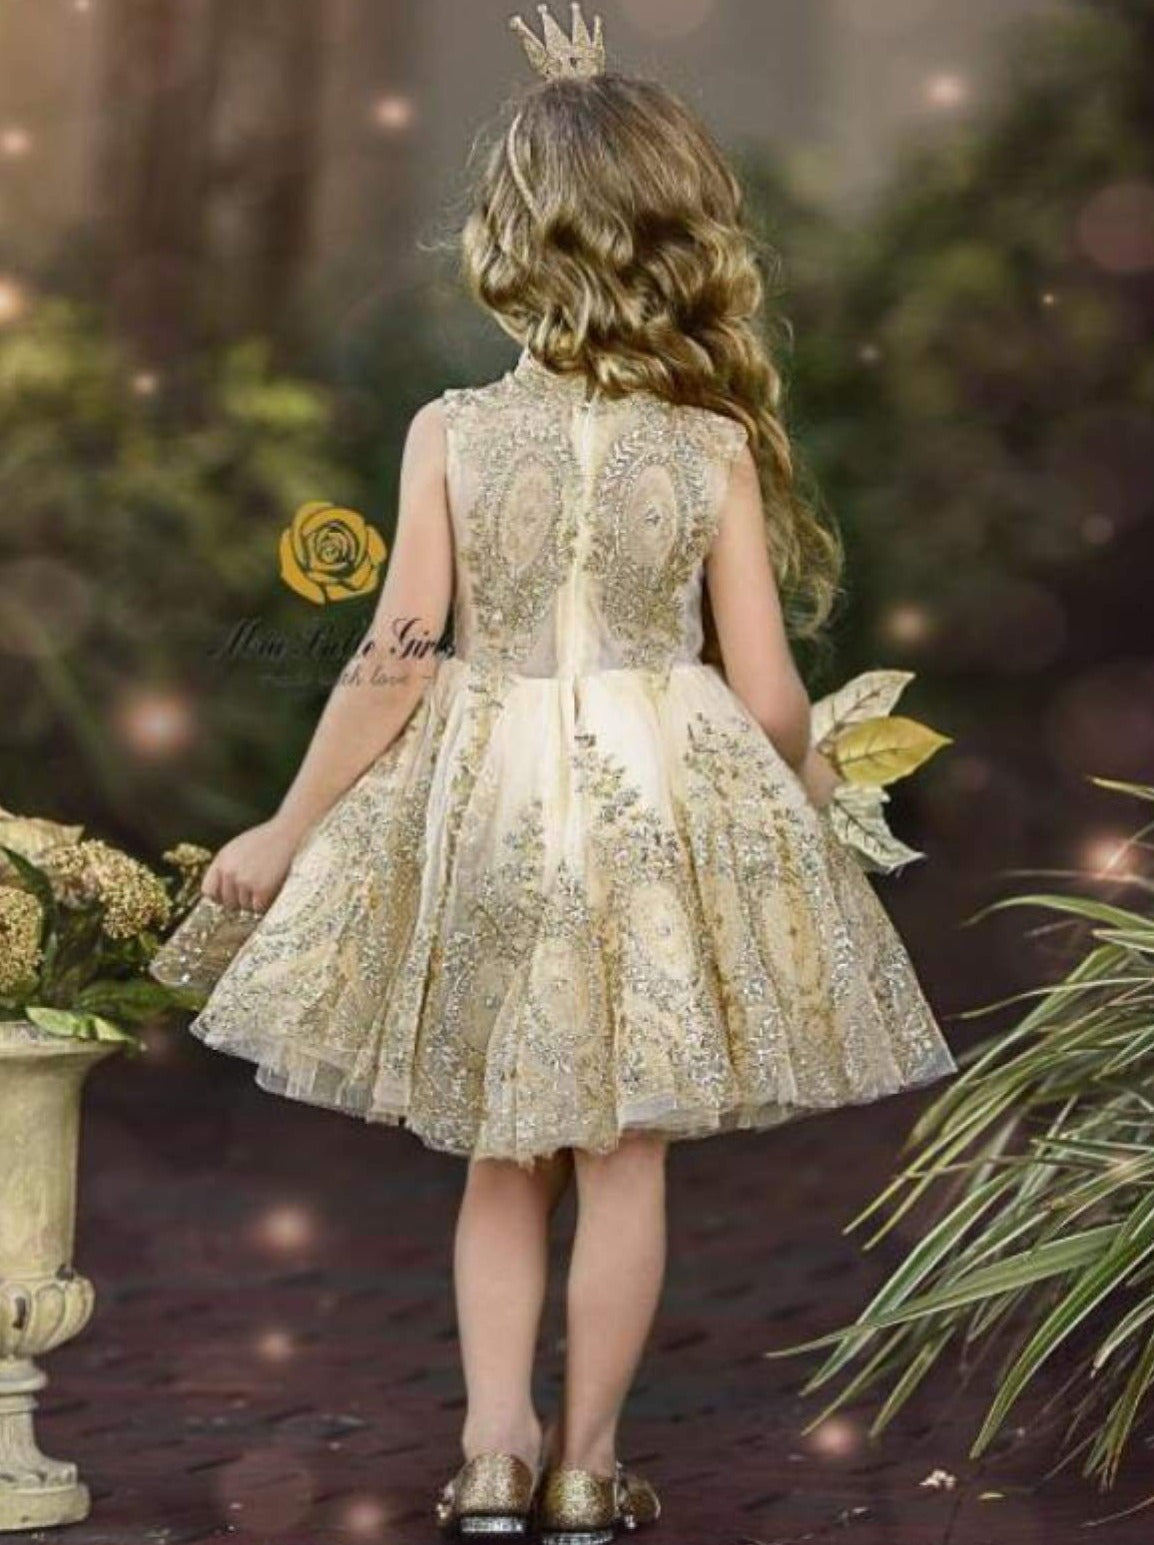 Girls Occasion Dresses, Girls Dresses For Special Occasions